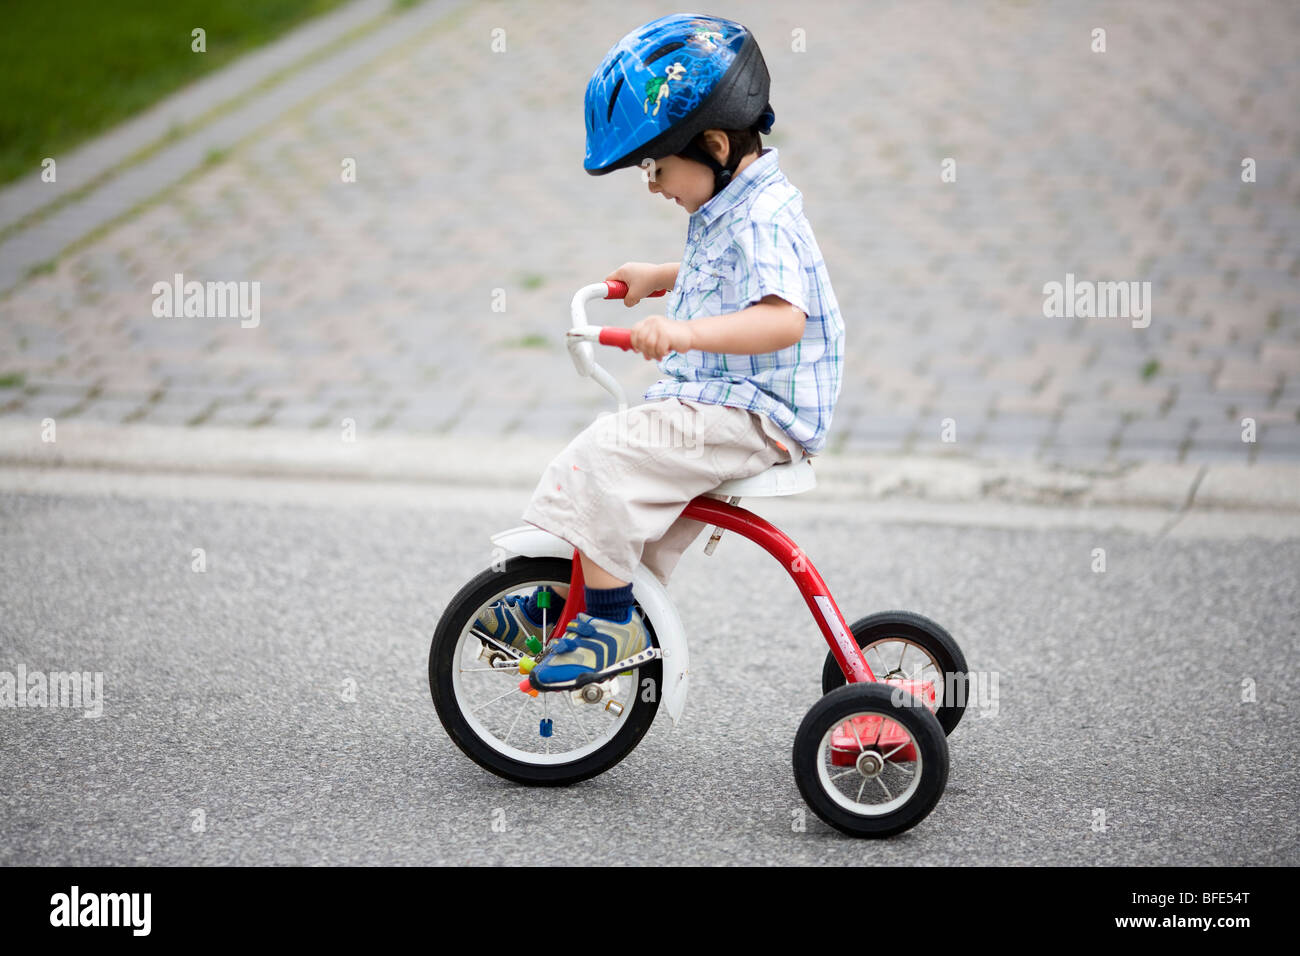 2 1/2 year old boy on a tricycle and wearing a helmet, Montreal, Quebec, Canada Stock Photo